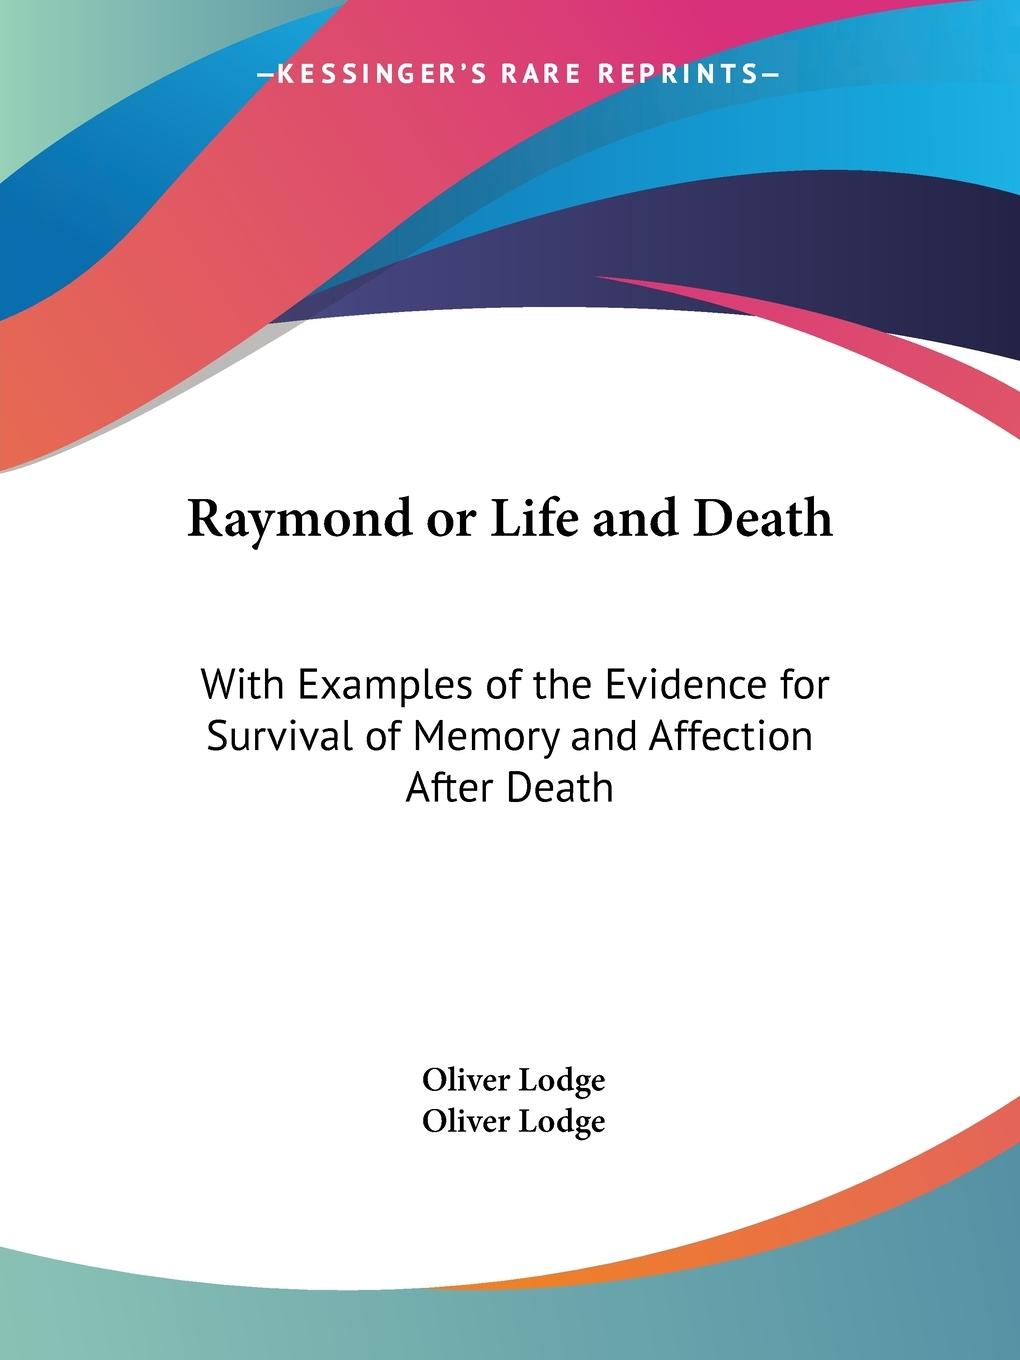 Raymond or Life and Death - Lodge, Oliver